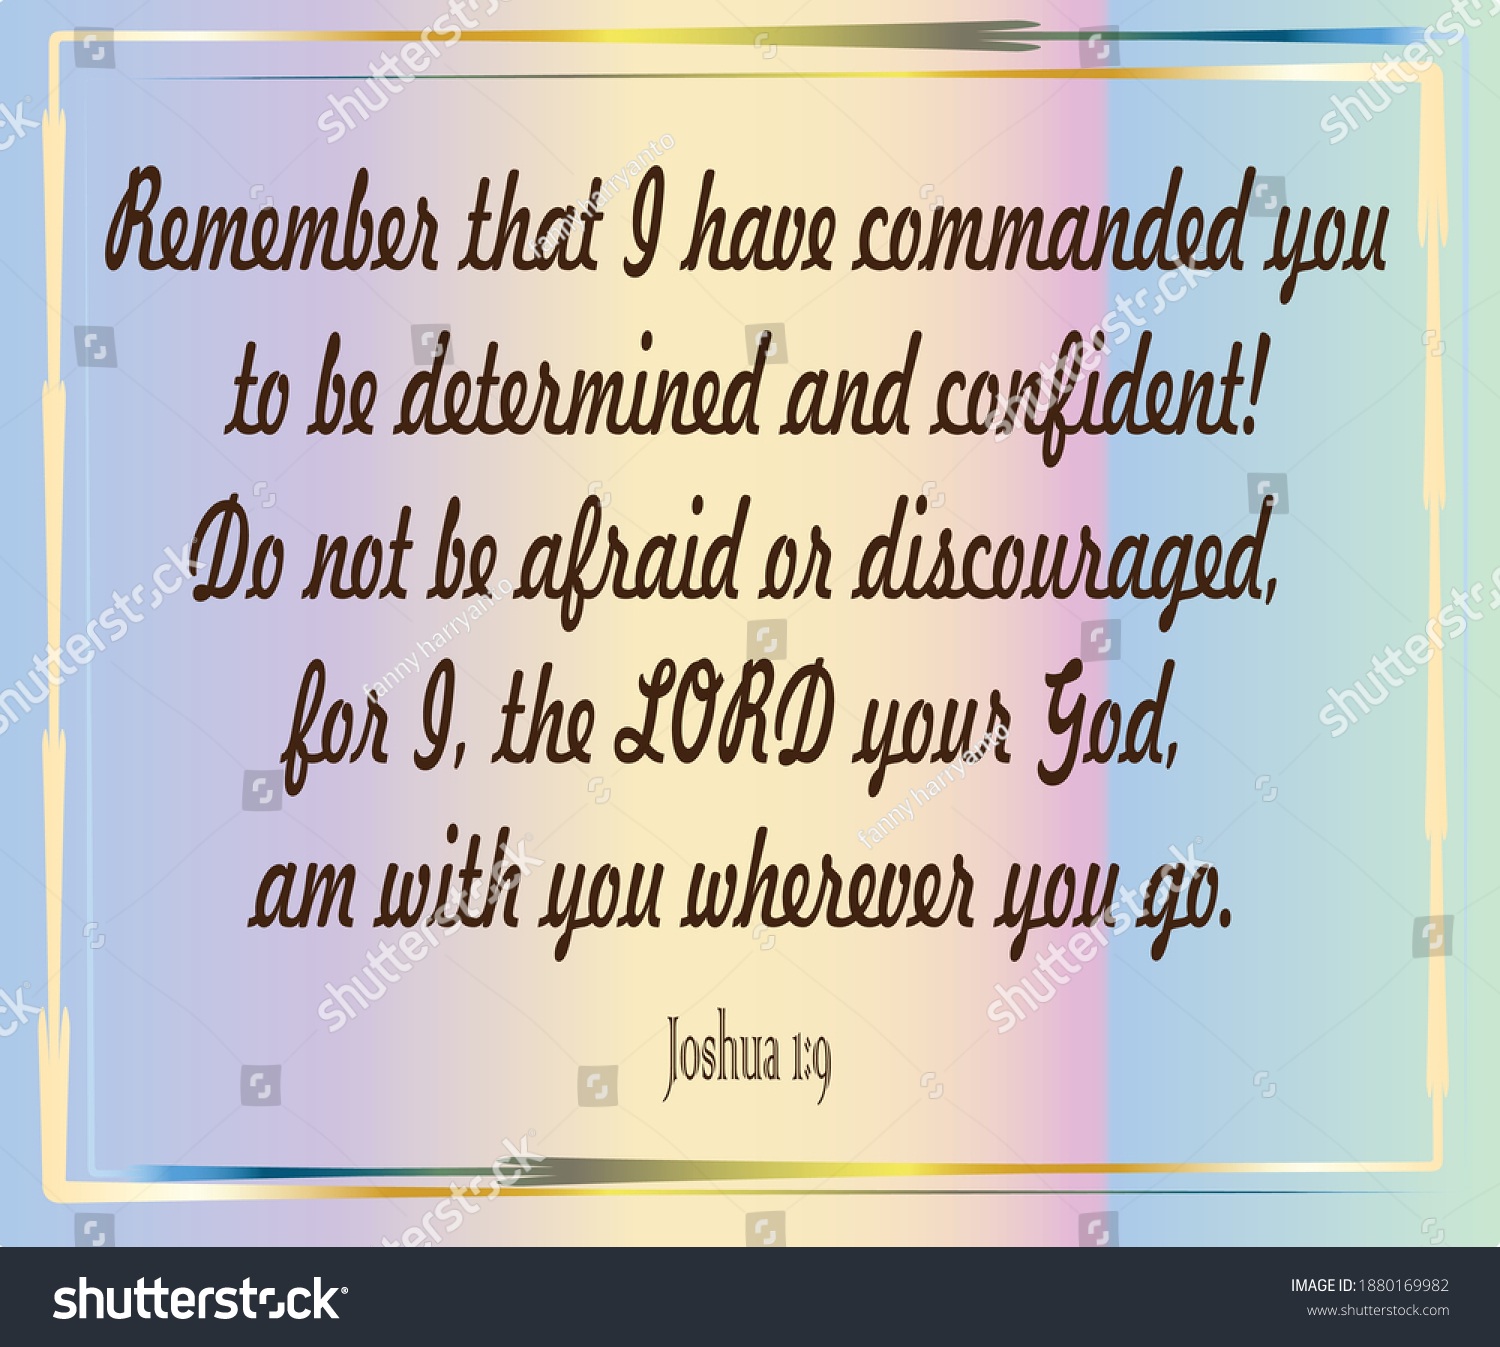 SVG of Bible verse. Joshua 1:9 Remember that I have commanded you to be determined and confident! Do not be afraid or discouraged, for I, the LORD your God, am with you wherever you go.
  svg